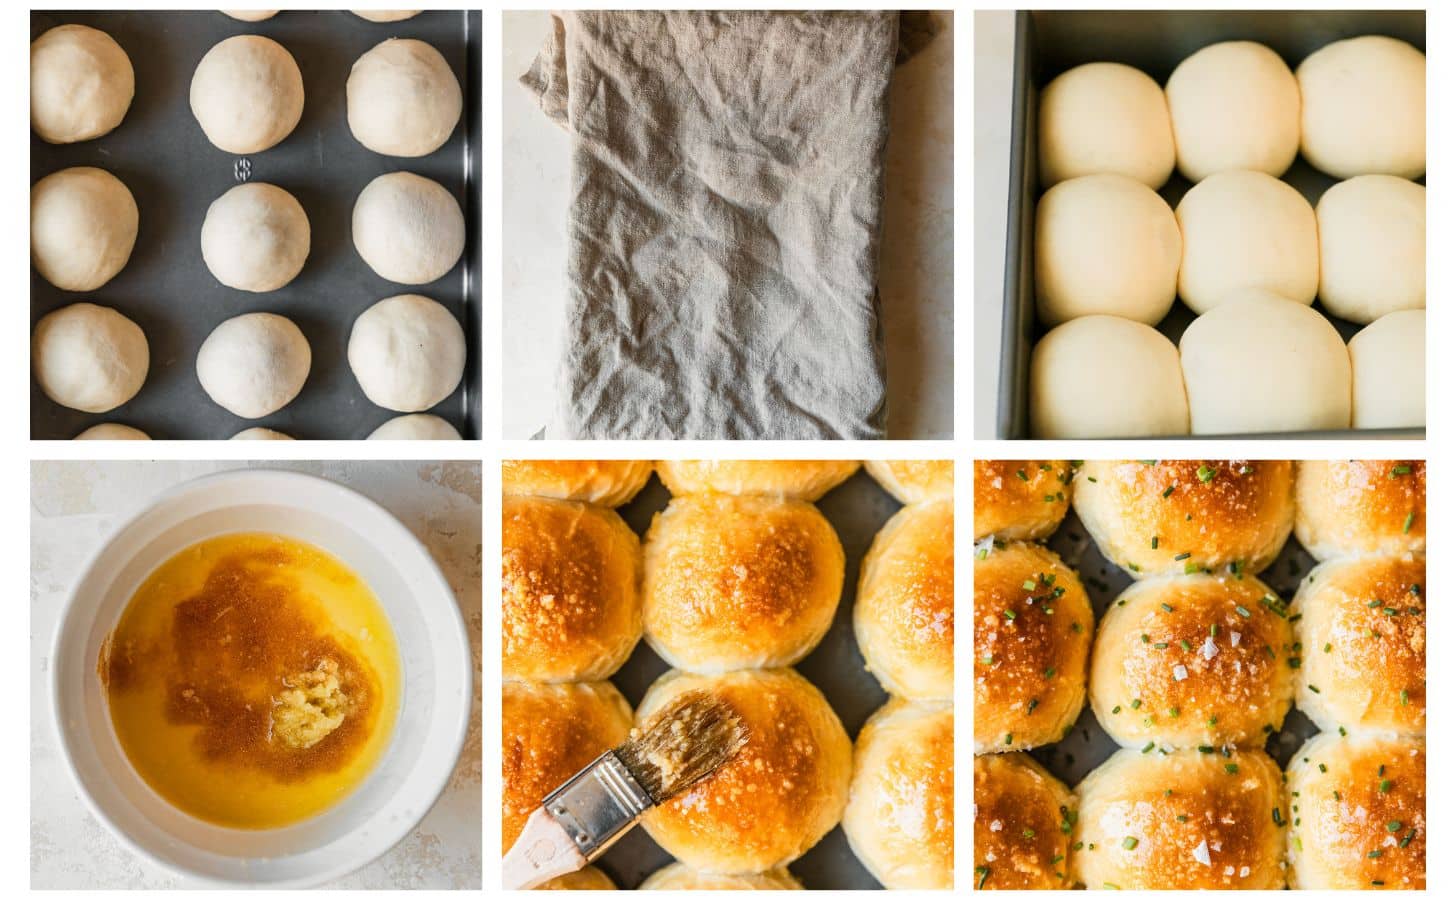 Six steps to making garlic butter dinner rolls. In photo 1, the rolls are placed in a pan. In photo 2, the pan is covered with a tan linen. In photo 3, the rolls have risen. In photo 4, melted butter is mixed with garlic and garlic powder in a white bowl. In photo 5, the garlic butter is brushed on the baked rolls. In photo 6, the rolls are topped with chives and flaky salt.